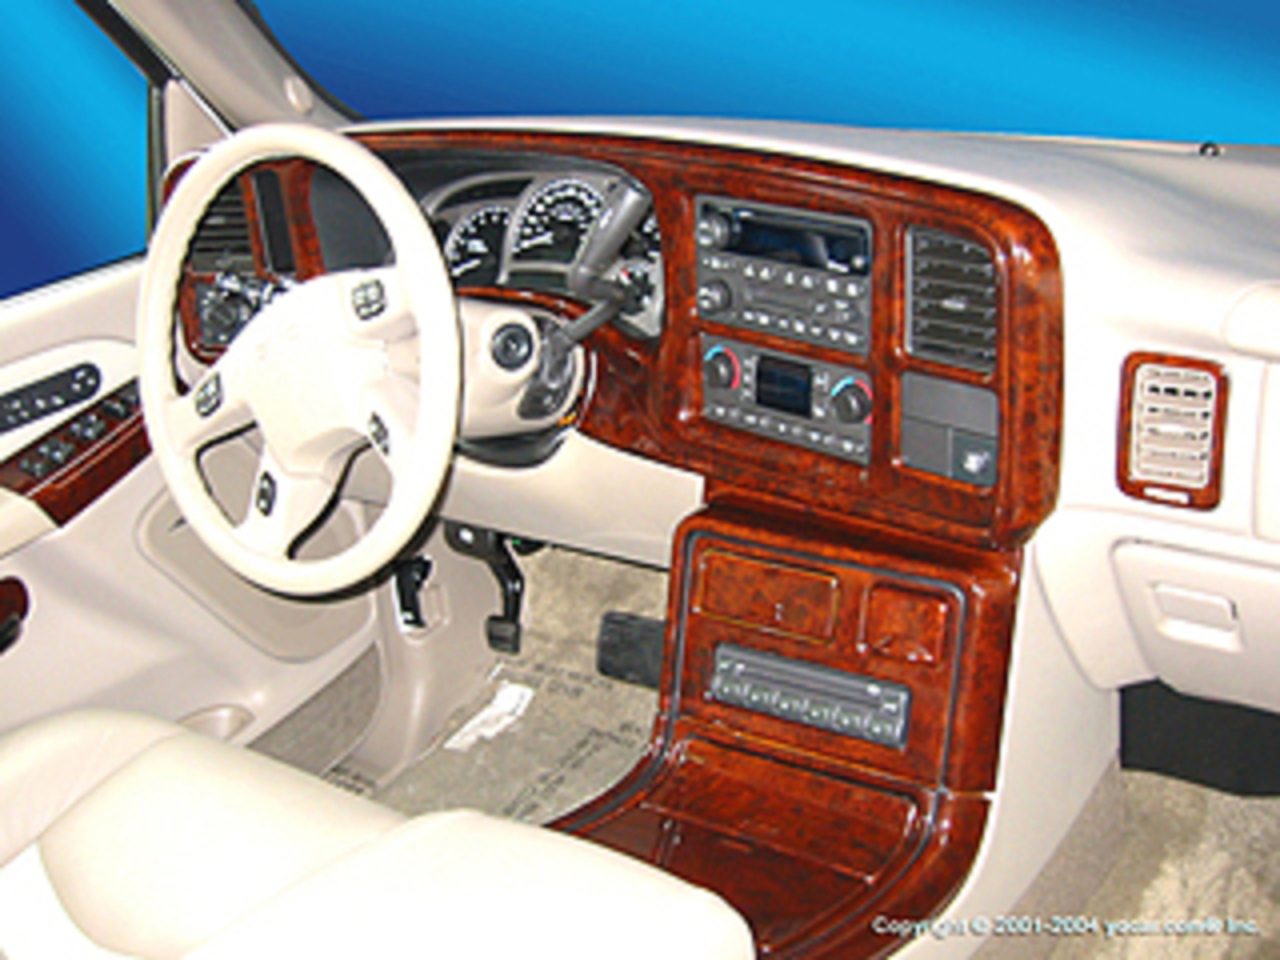 The 2003 - 2006 GMC Denali wood dash kit is a strong seller year in and year